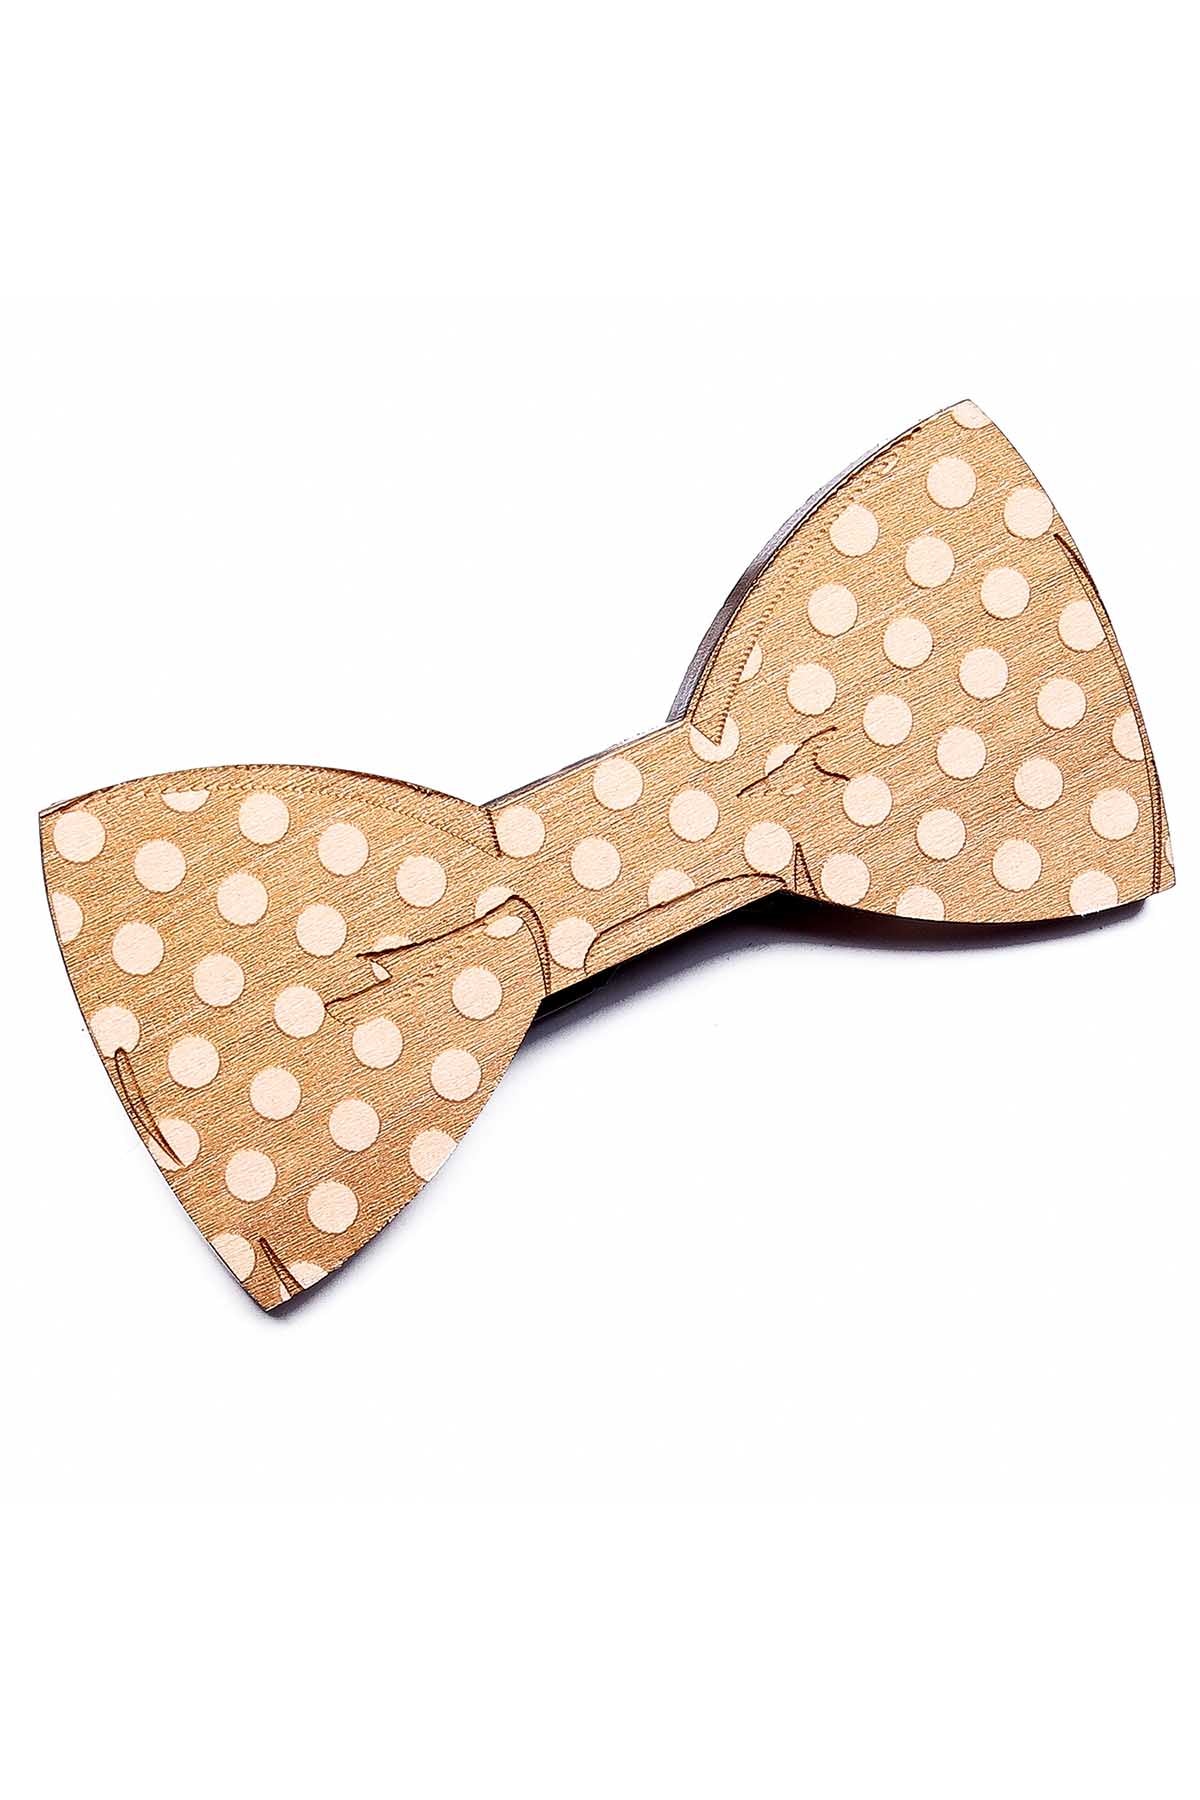 Brand Breeders Brown Polka Dot Party Wooden Bow Tie